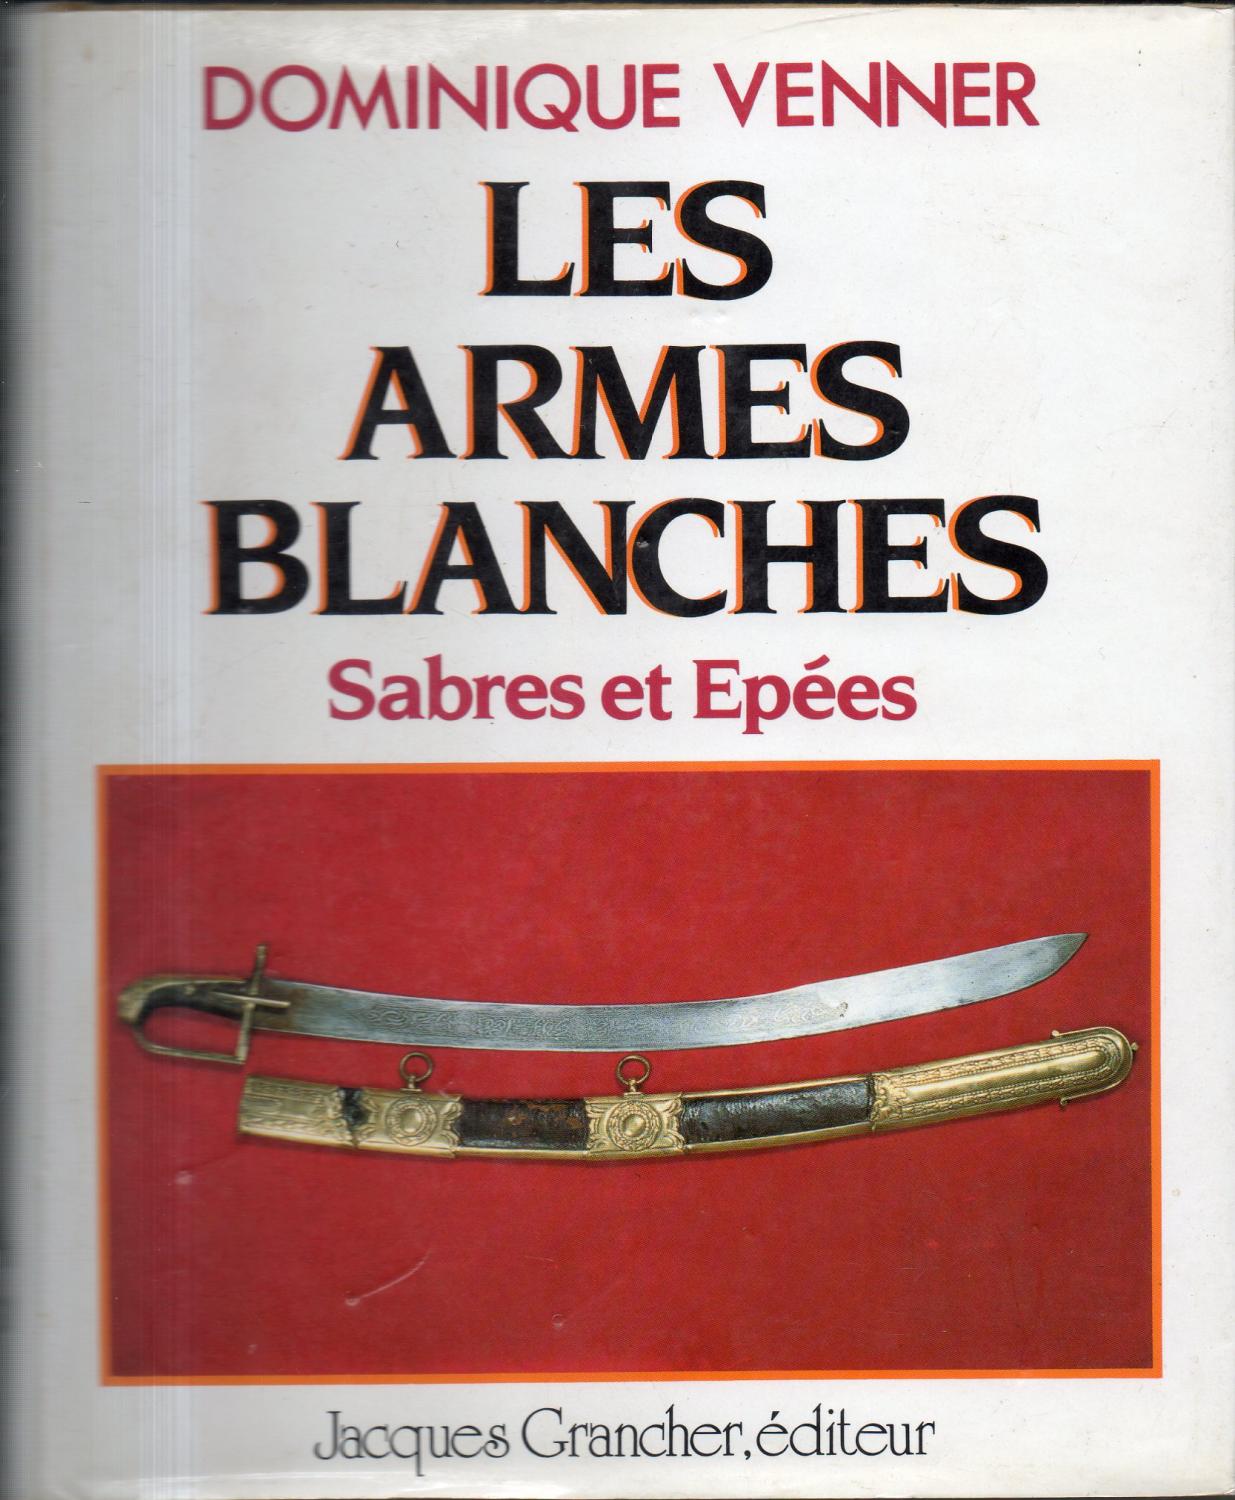 Les armes blanches